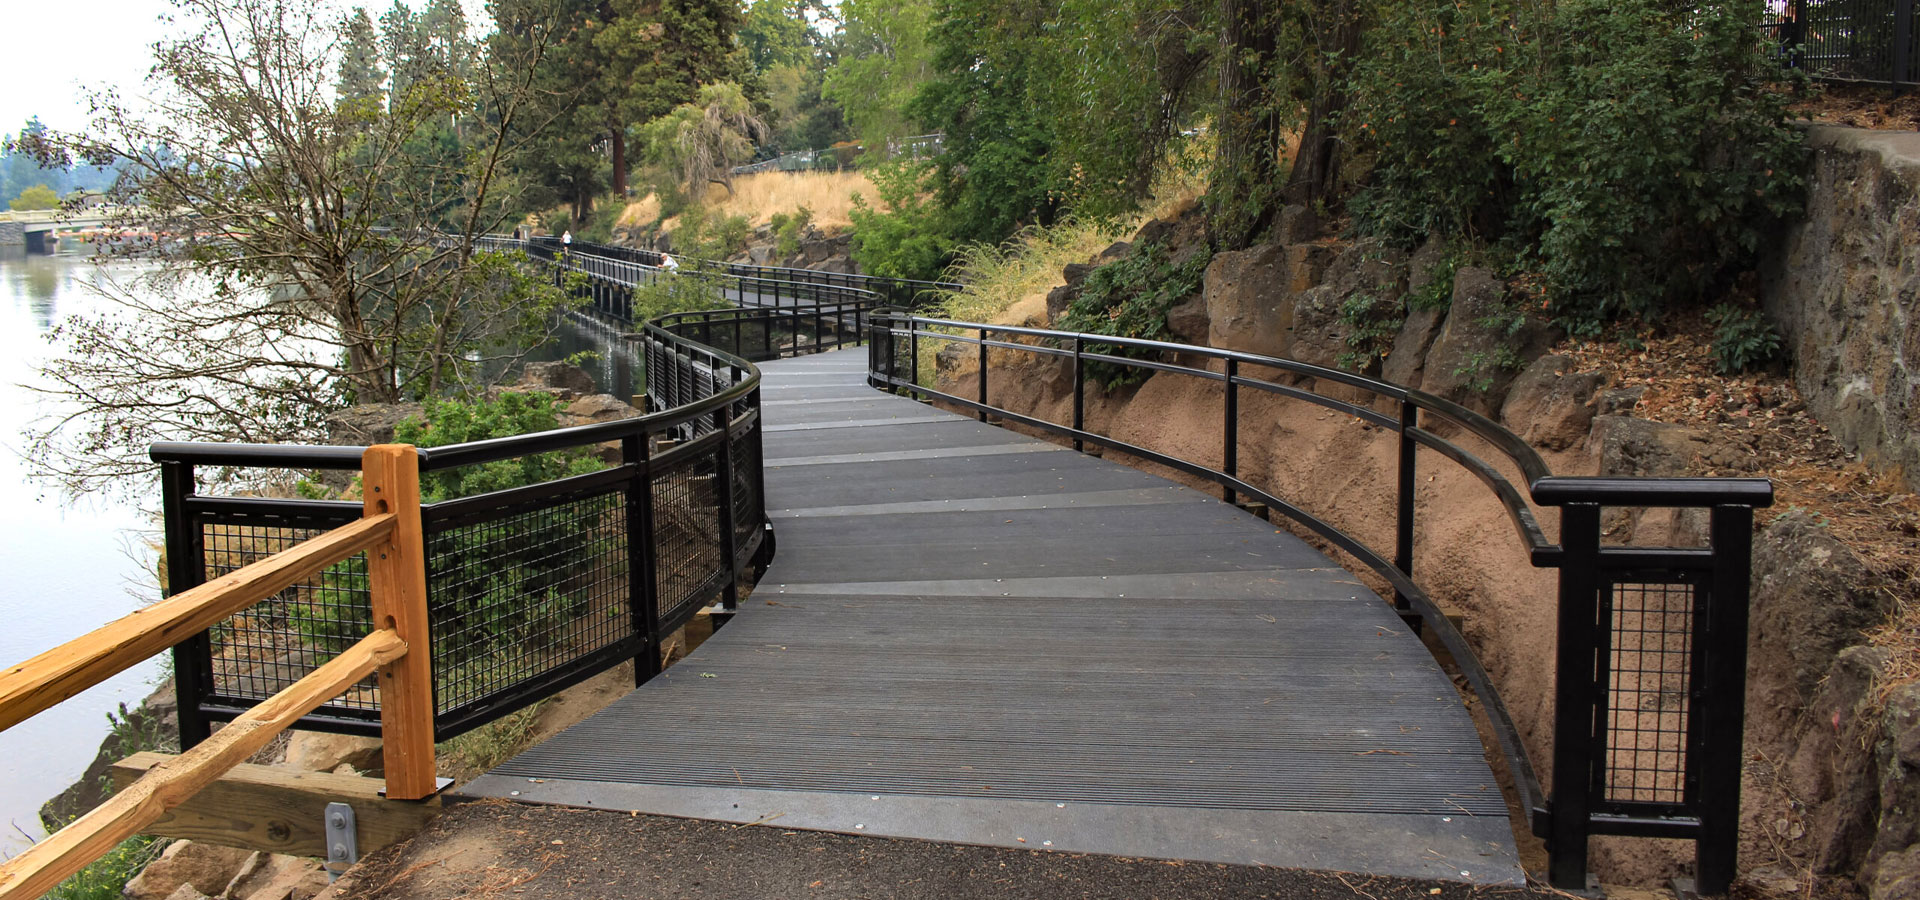 Southern entrance to the Drake Park boardwalk, flanked by the Deschutes river and the river bank with grass and trees